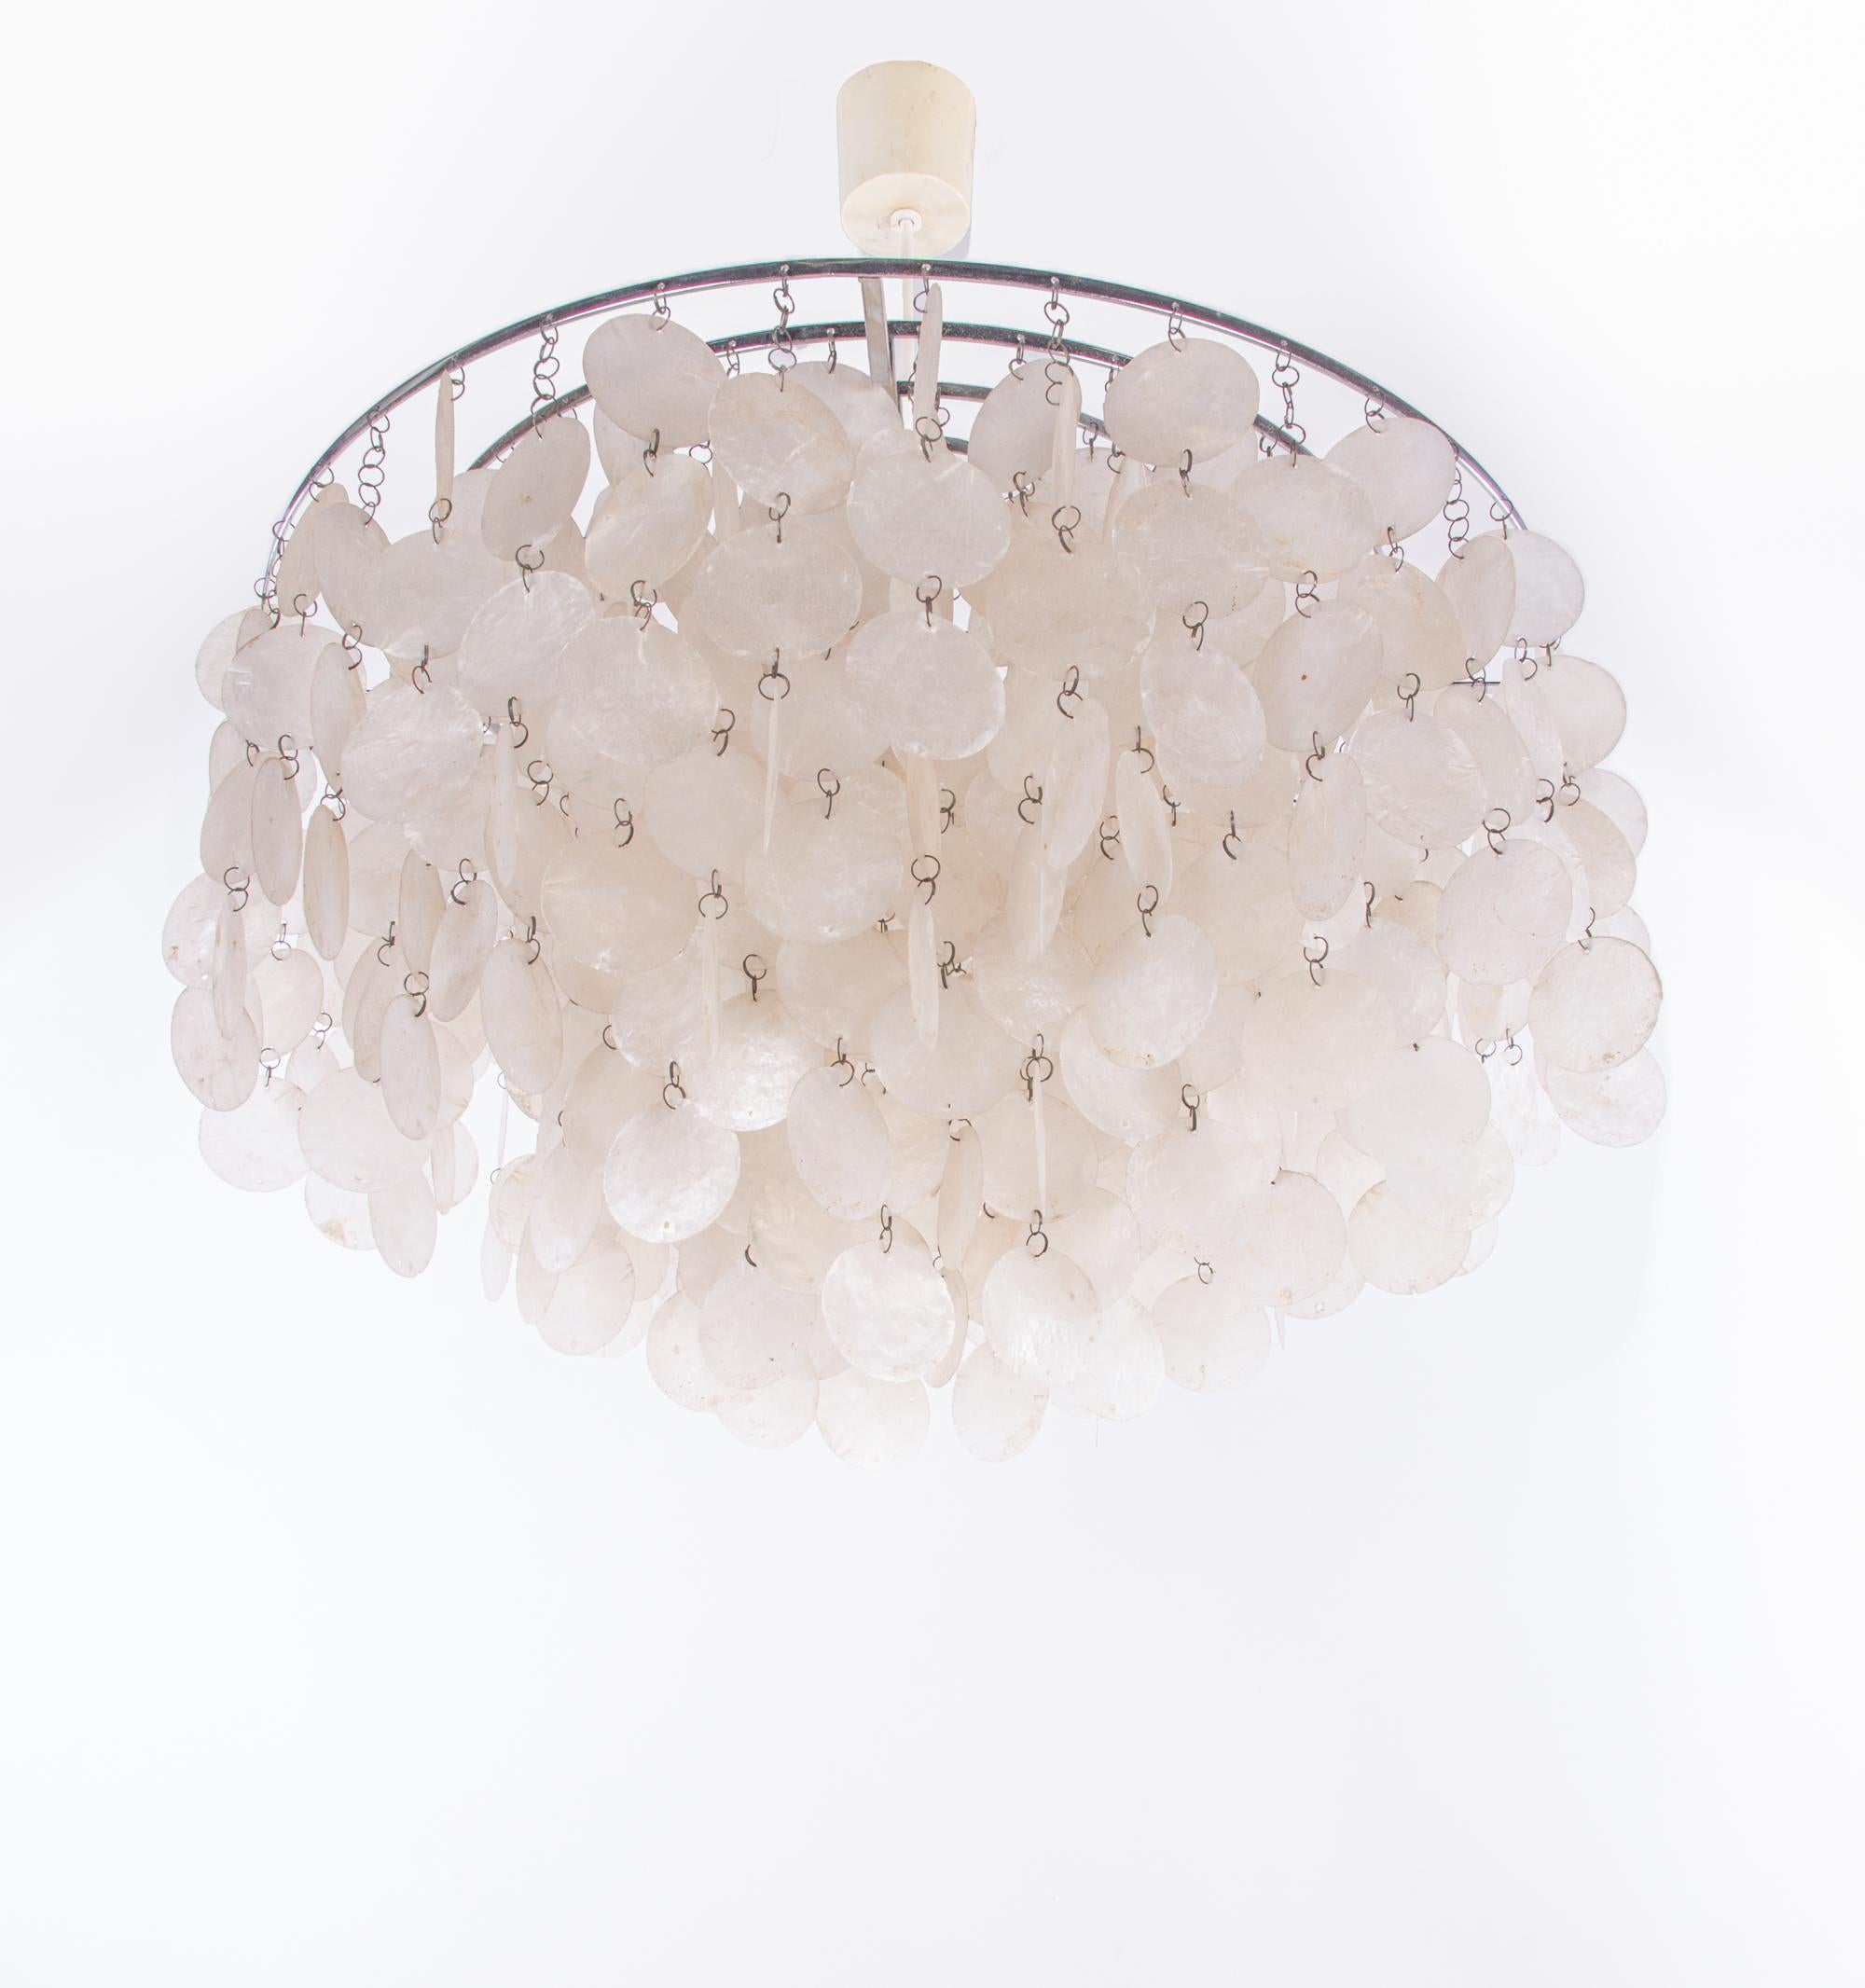 '1 of 3' Fun Shell Chandelier by Verner Panton for J. Luber Ag, Switzerland 1964 For Sale 2